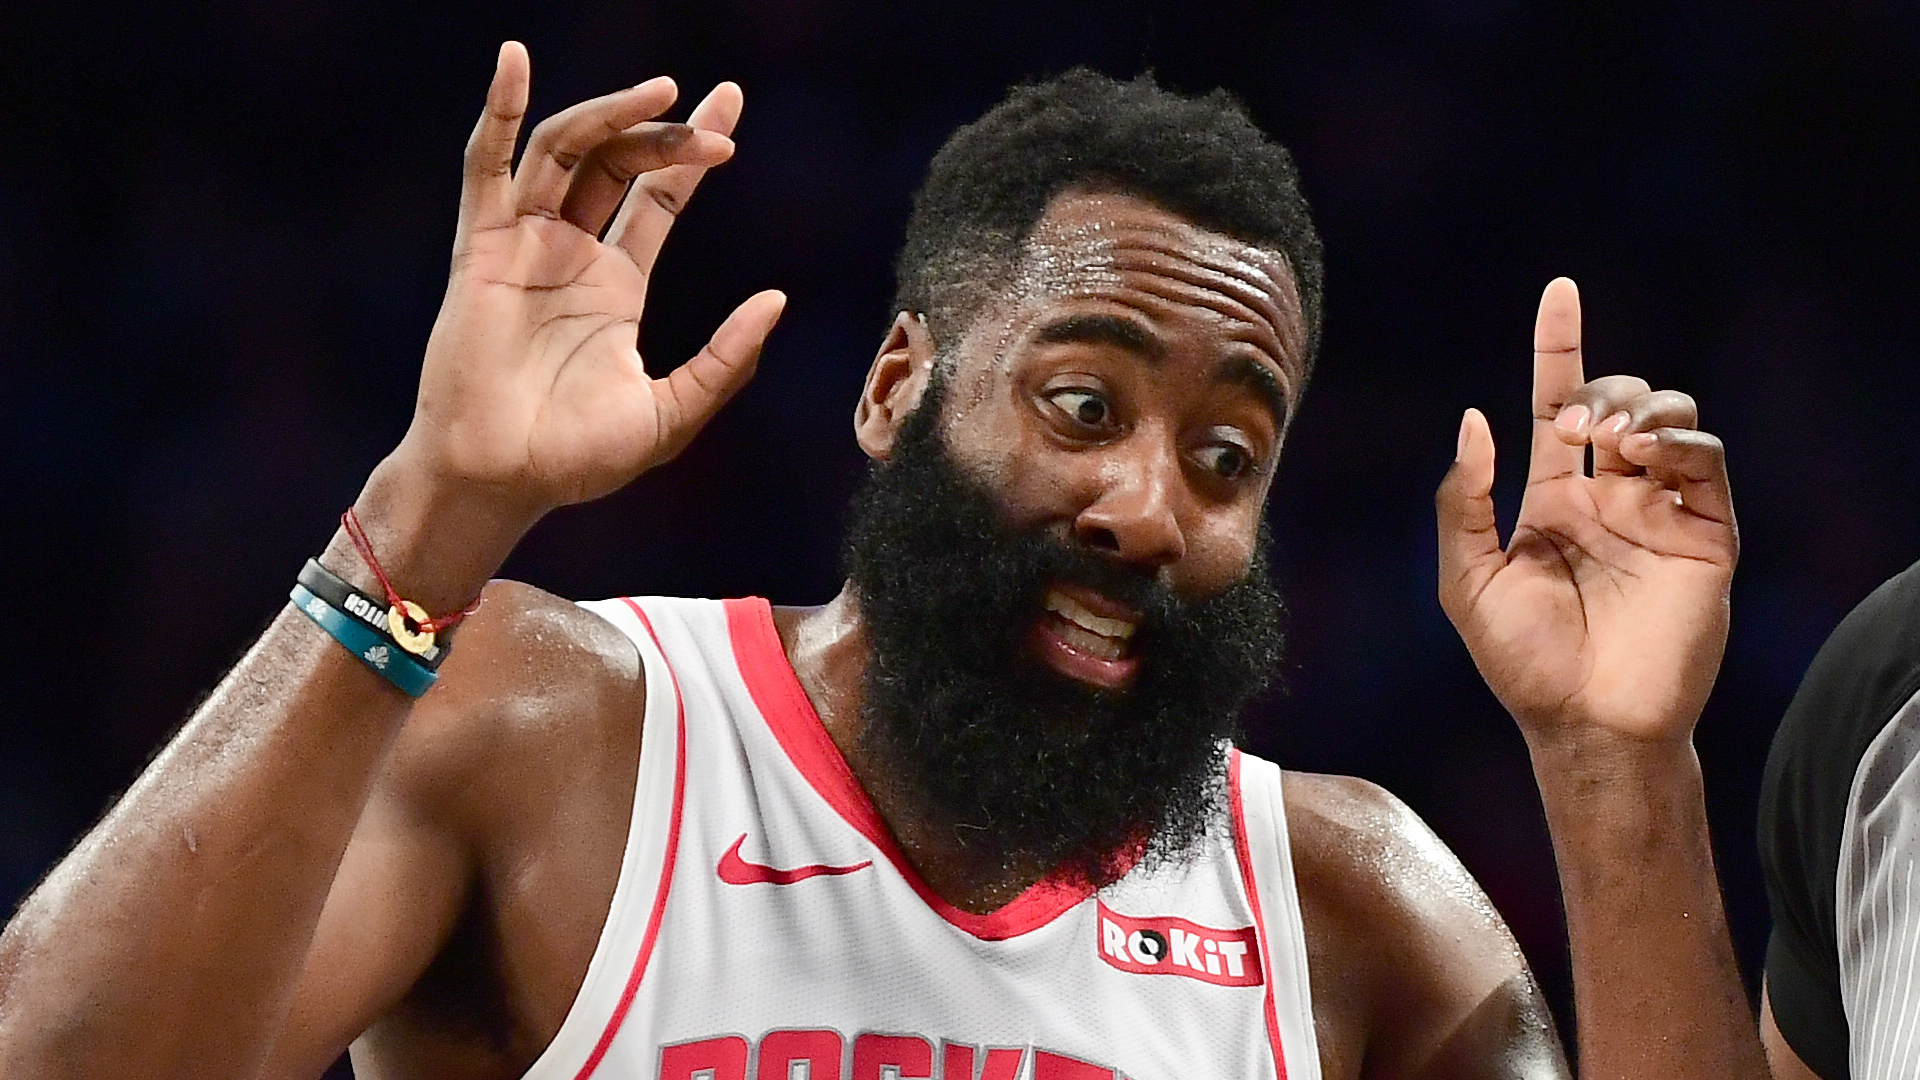 Giannis Antetokounmpo mocked James Harden during the All-Star break, and the Houston Rockets ace shot back this week.